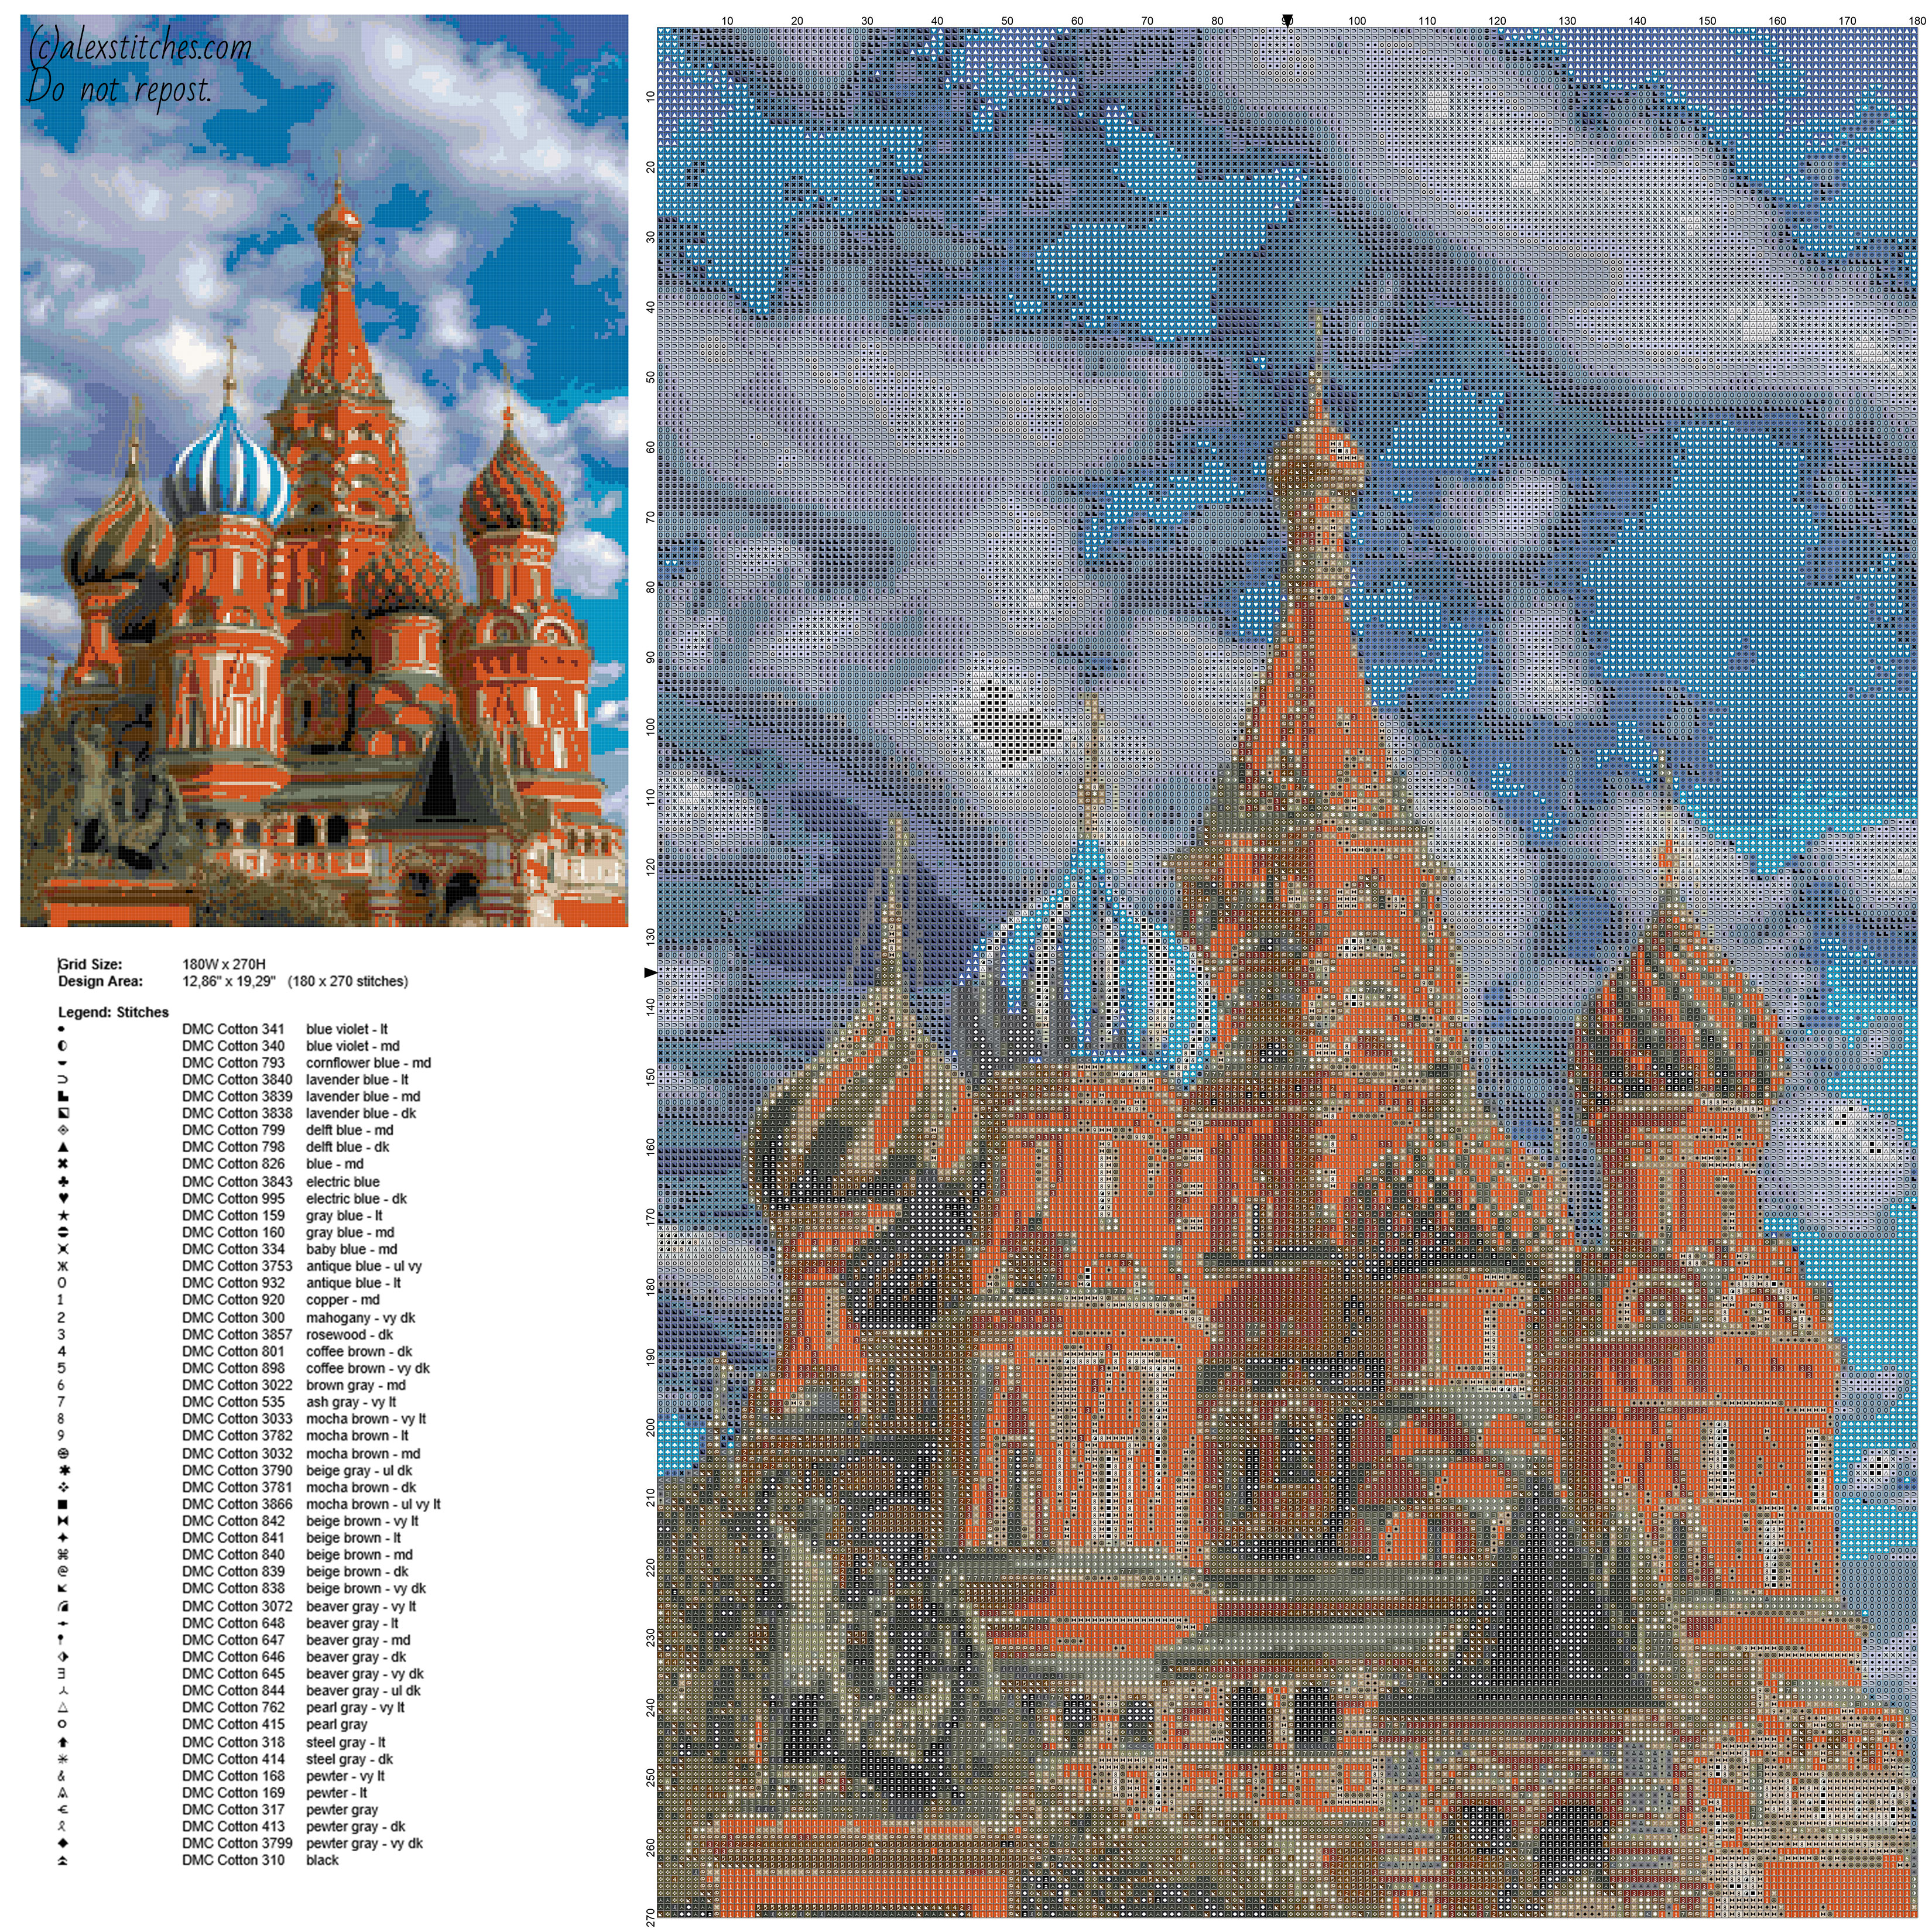 St_ Basil’ s Cathedral Moscow Russia famous place free cross stitch pattern made with PcStitch size 180 x 270 stitches